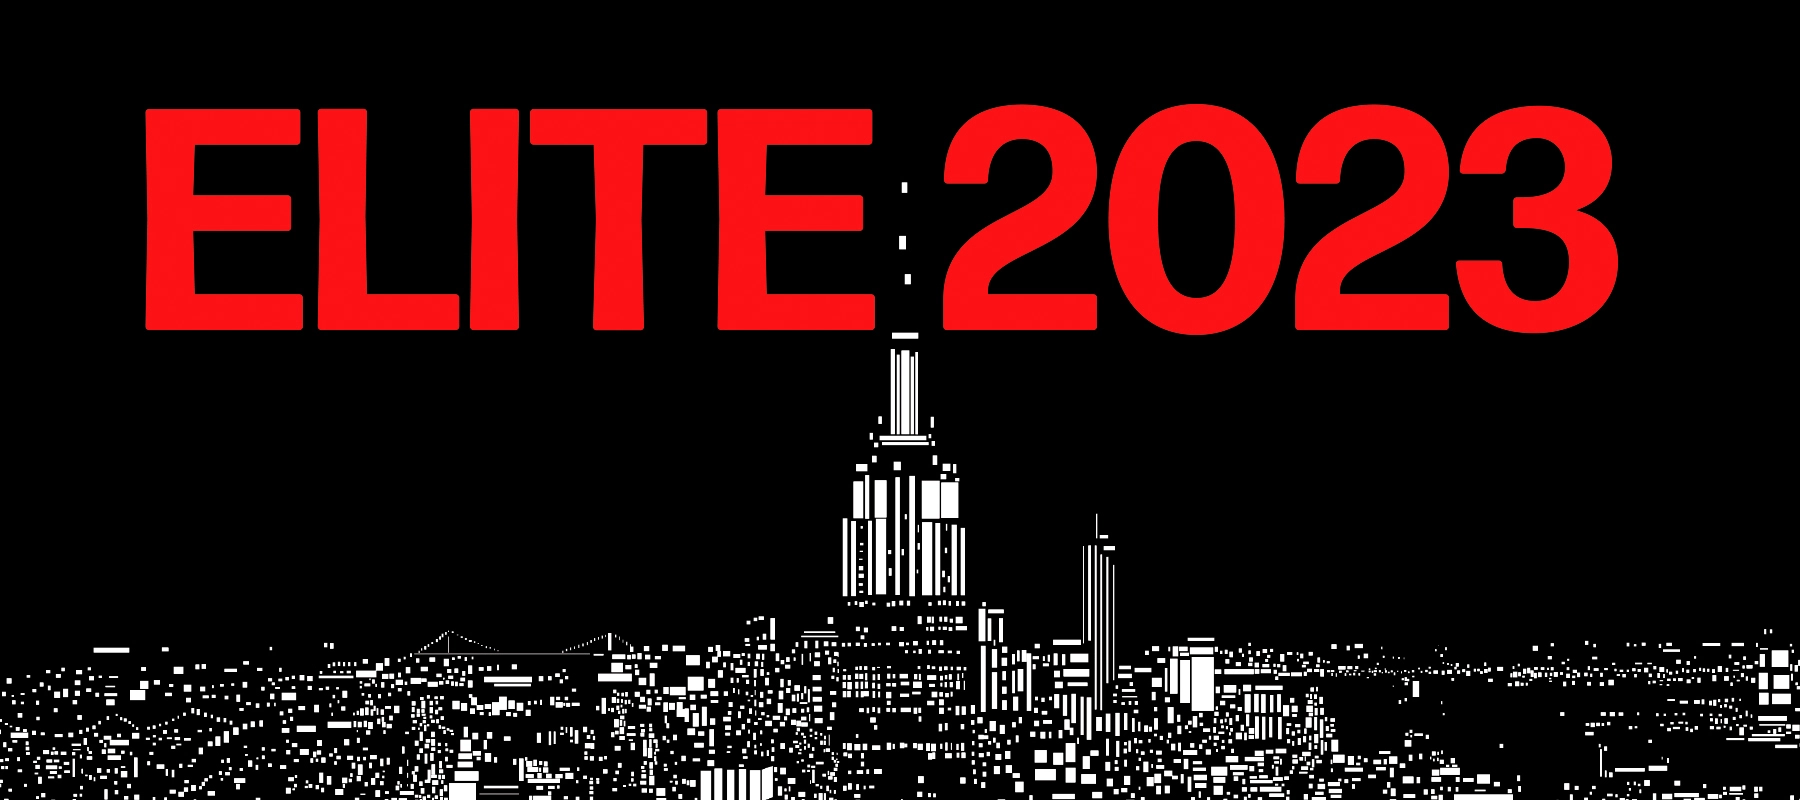 Bold red "ELITE 2023" letters on black background with silhouettes of buildings, including Empire State Building.